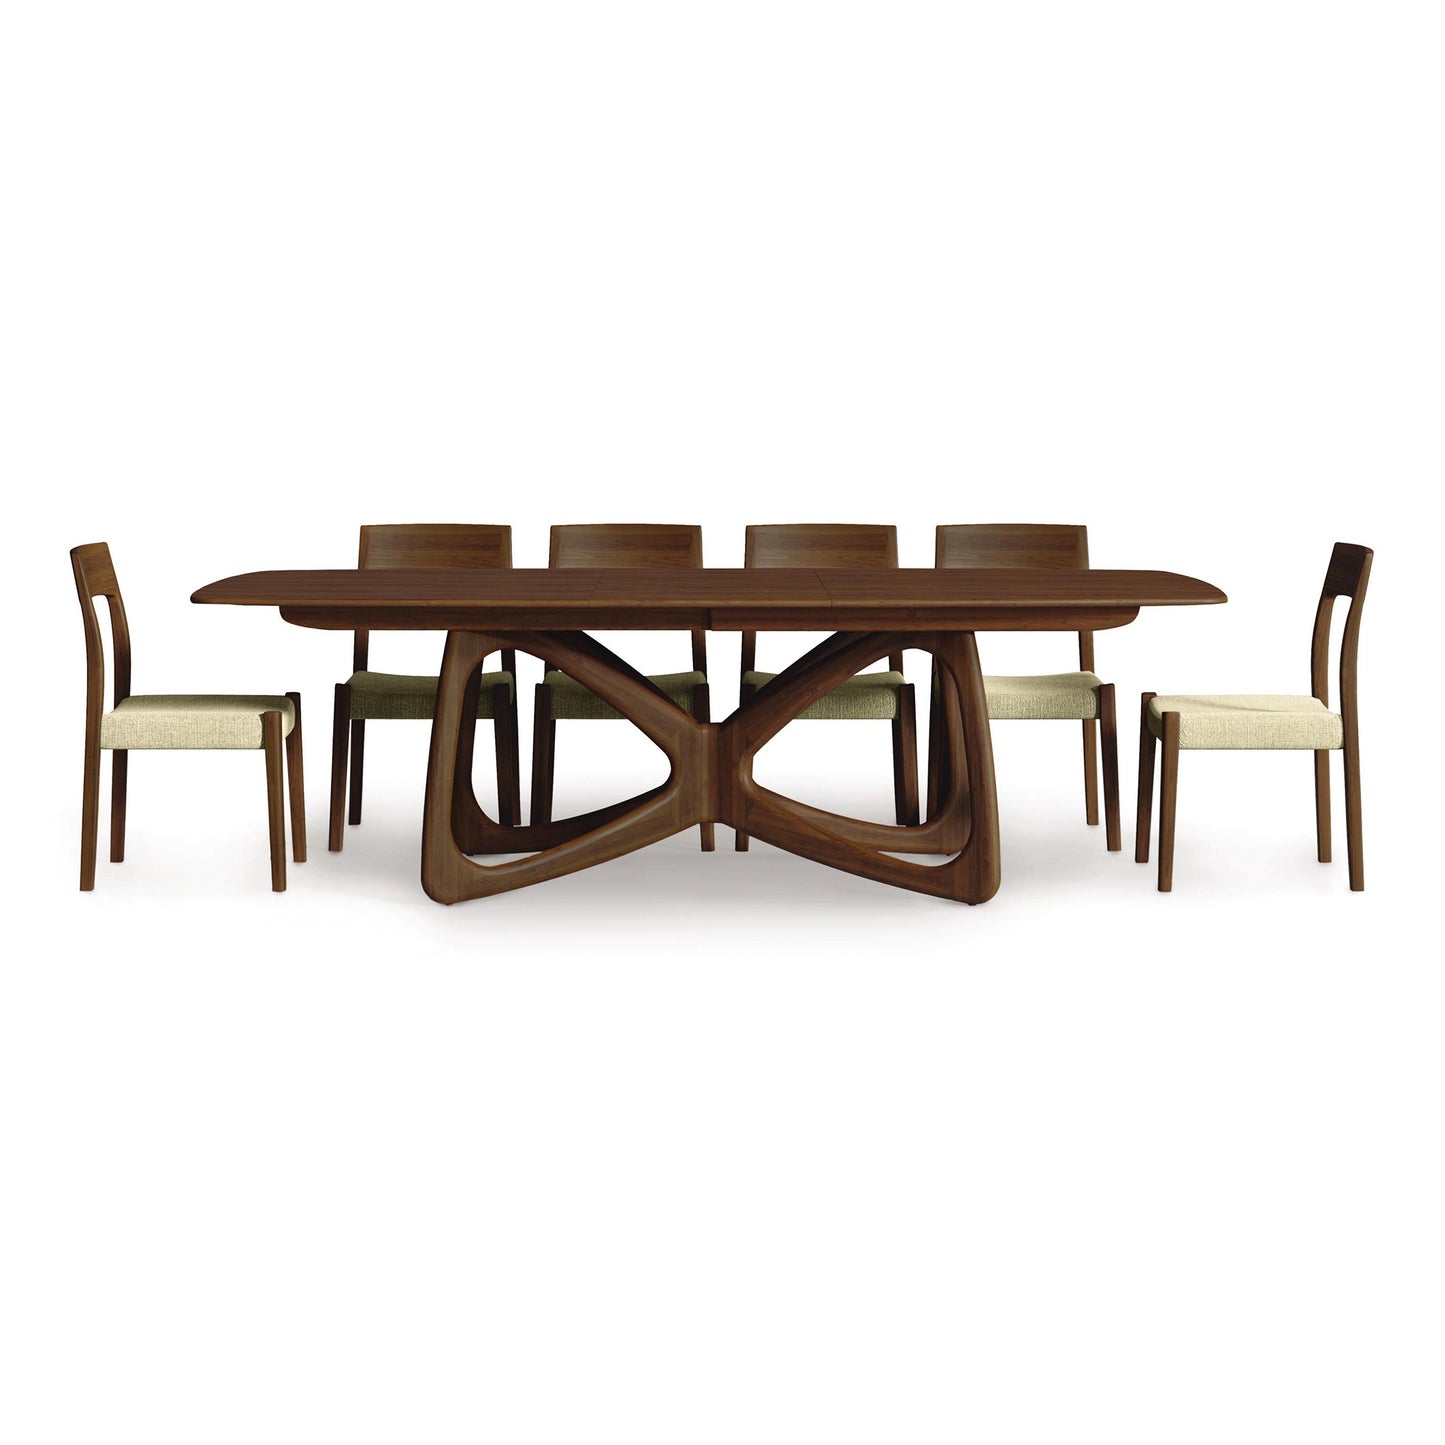 Alt text: Solid wood modern dining table set by Copeland Furniture featuring an oval Butterfly Extension Dining Table with double pedestal base, interlocking supports, and six matching wooden chairs with beige cushions. Sustainably sourced hardwood construction. Open backrest chairs on a white background.